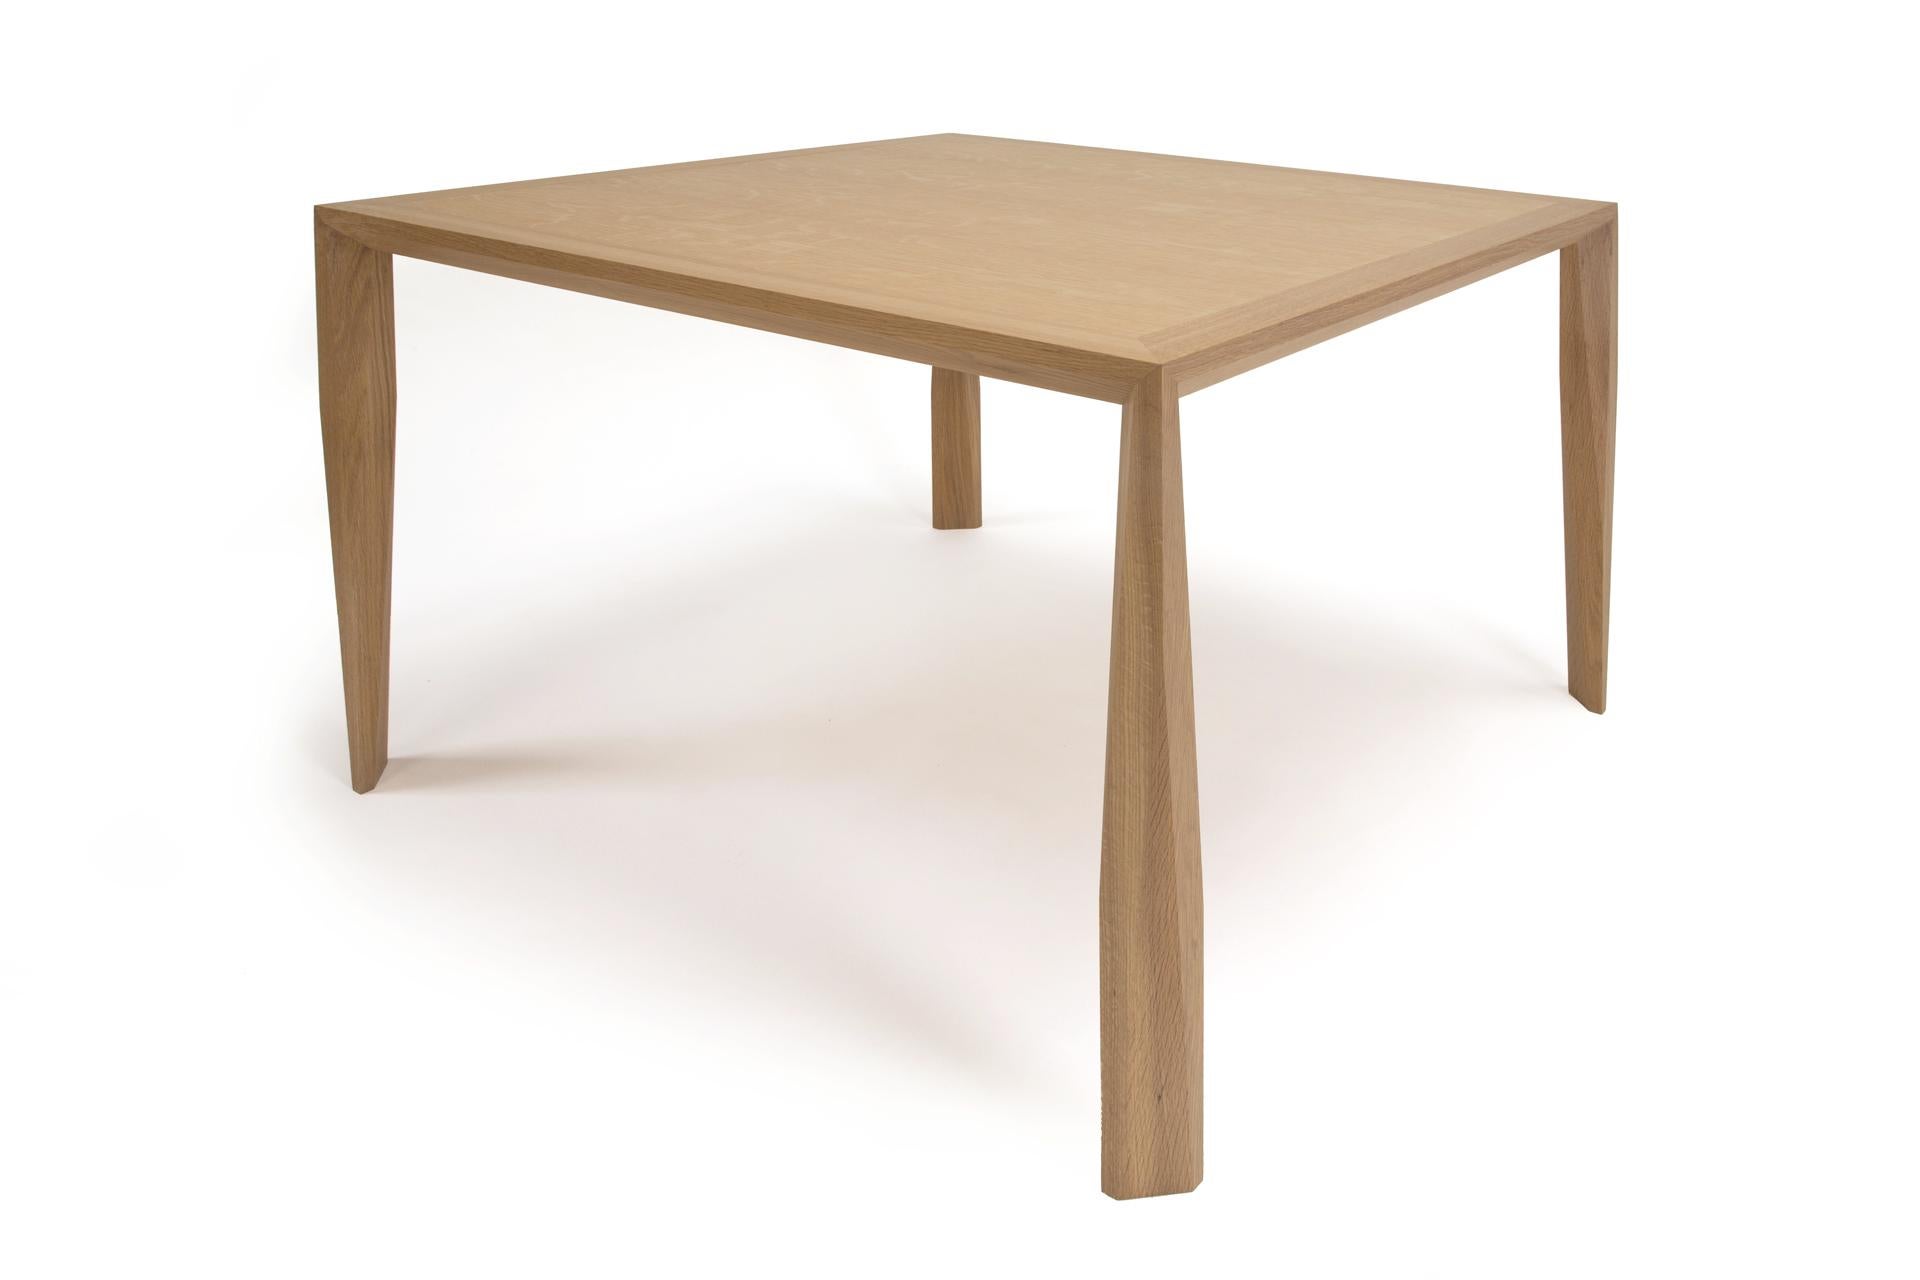 This dining table in our new dining table/console table series is called the 